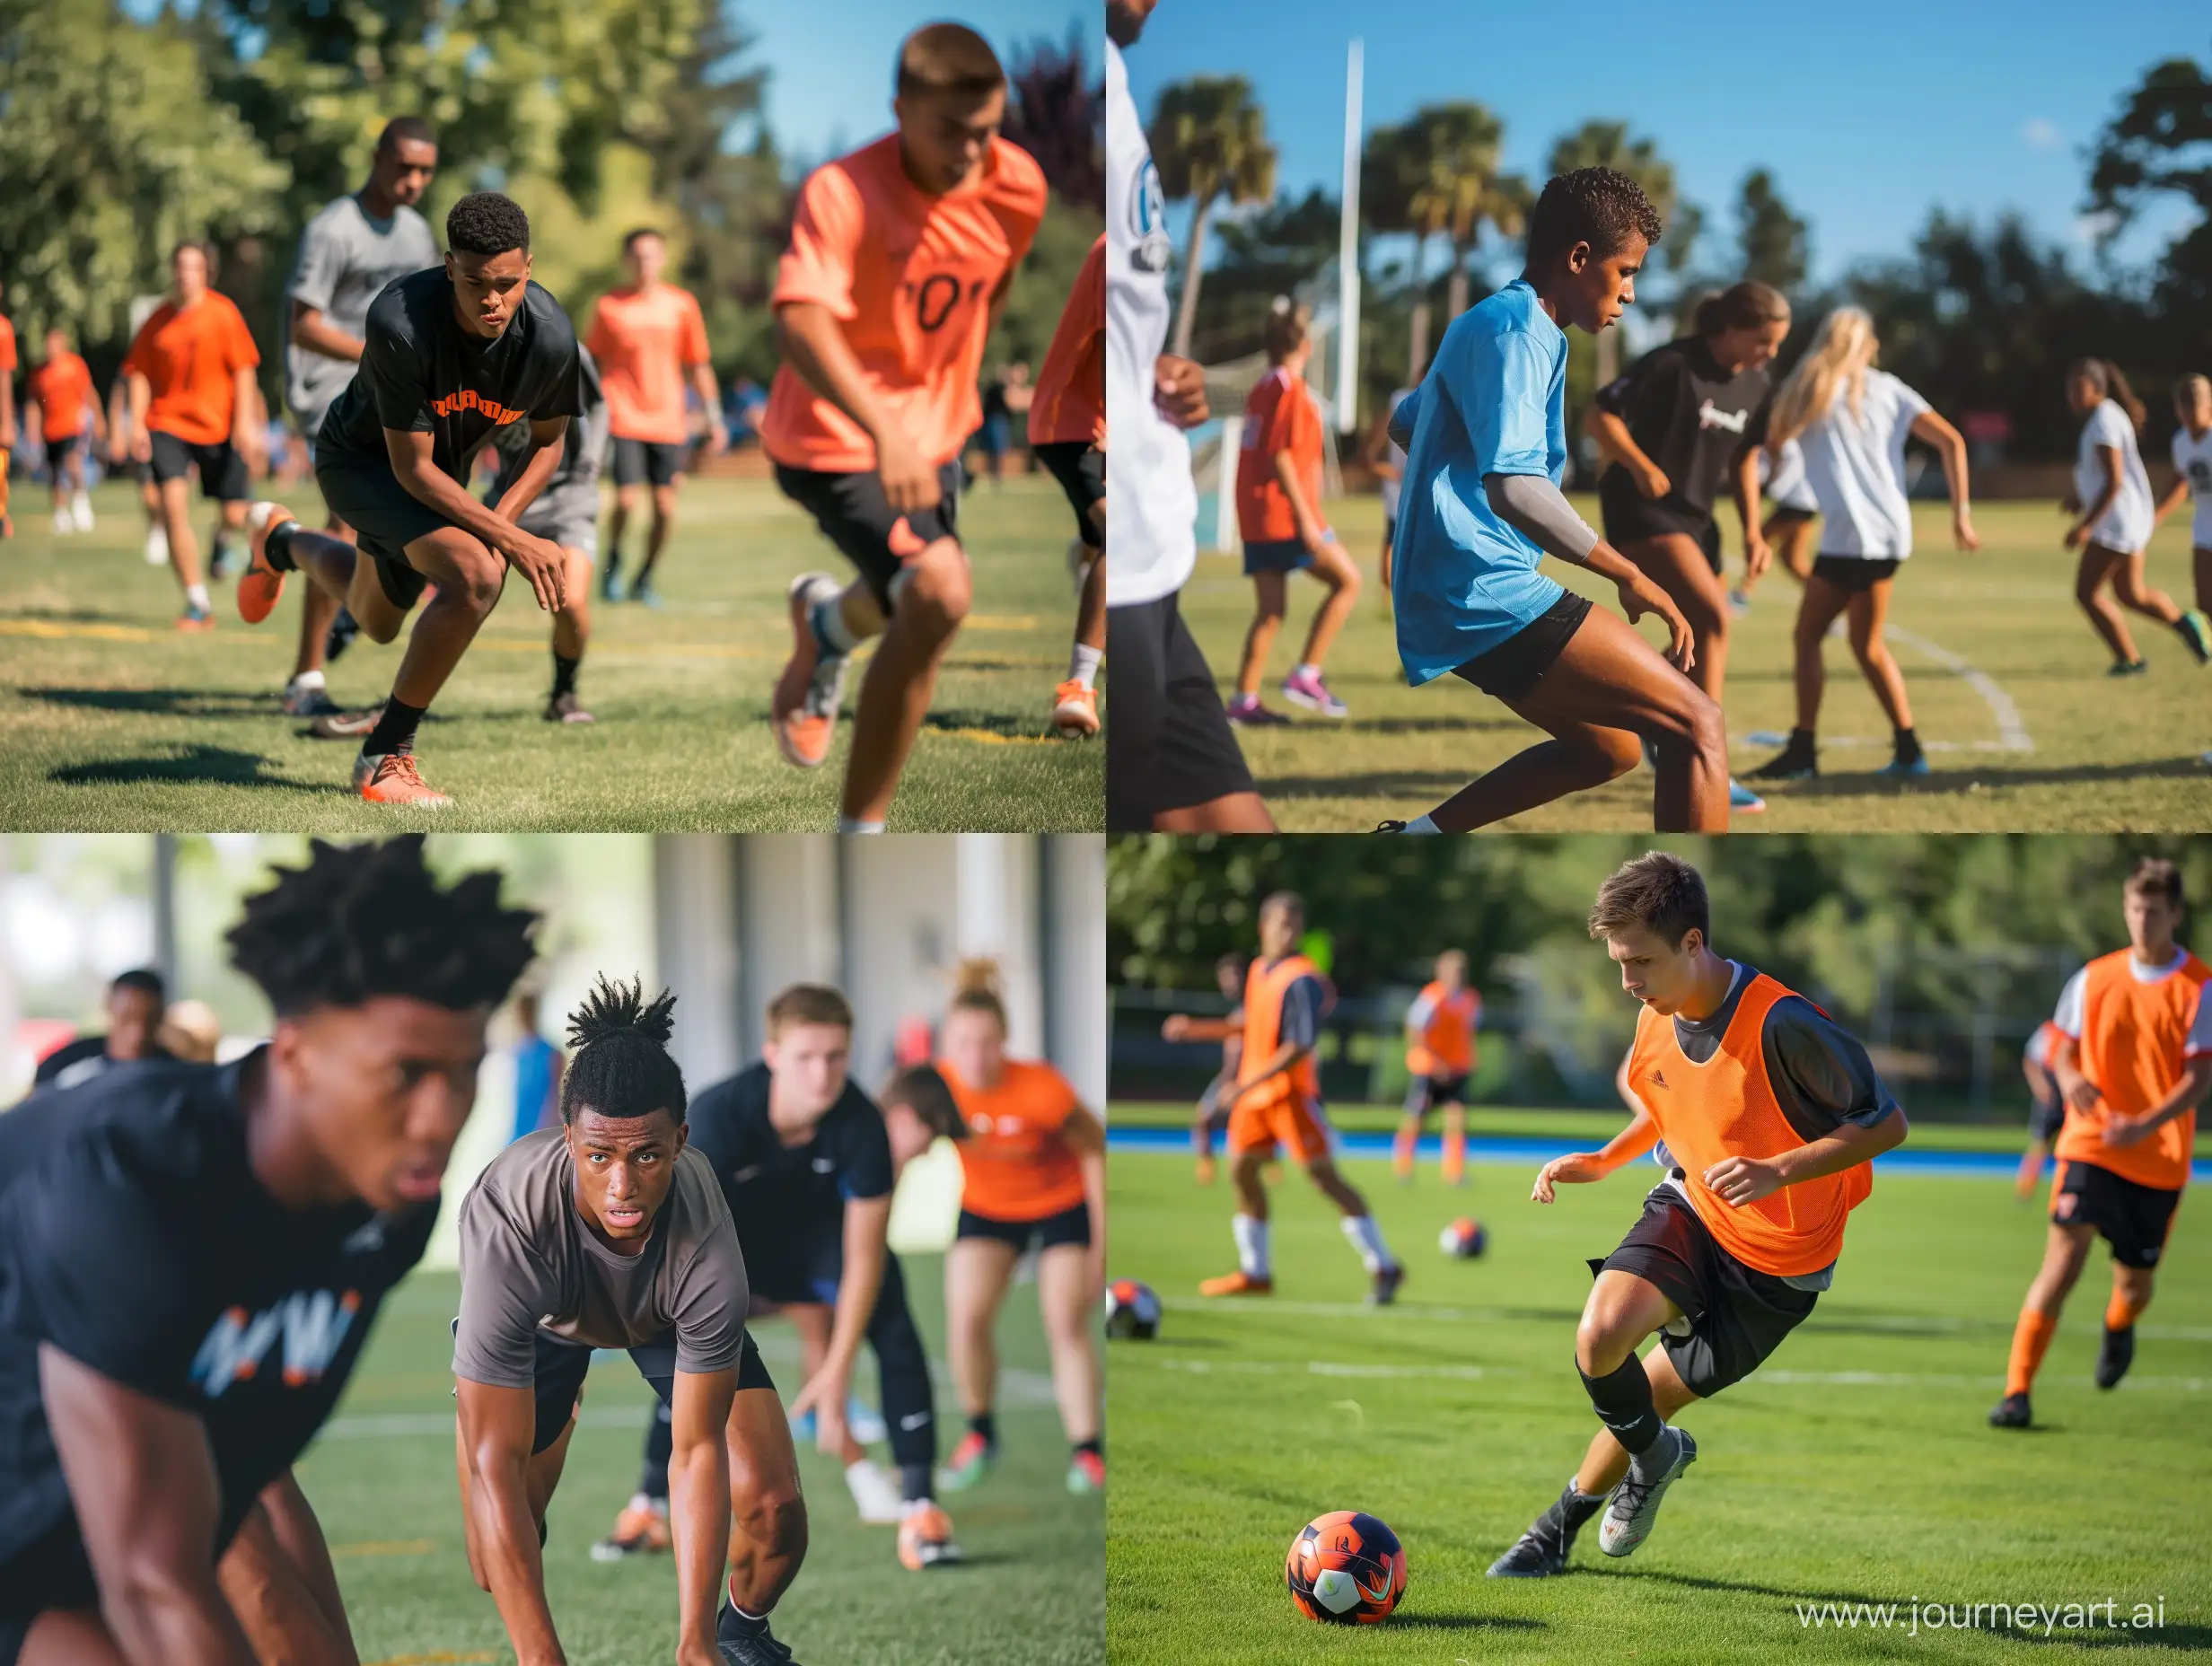 Images showing players honing their skills and working on technique can promote the idea of education and growth within the camp.